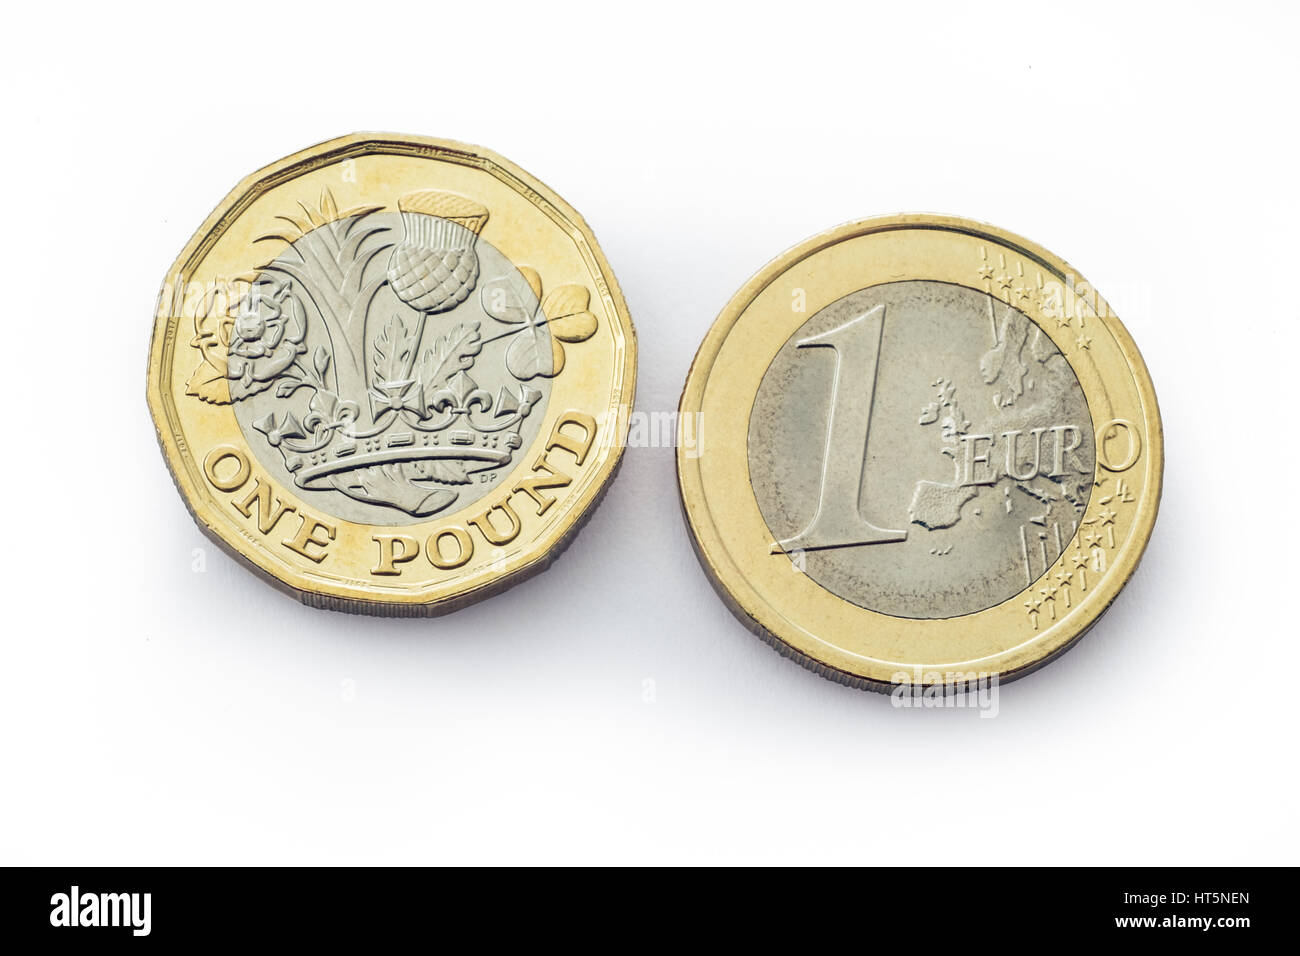 Similar coins for the monetary units of Britain and Europe Stock Photo